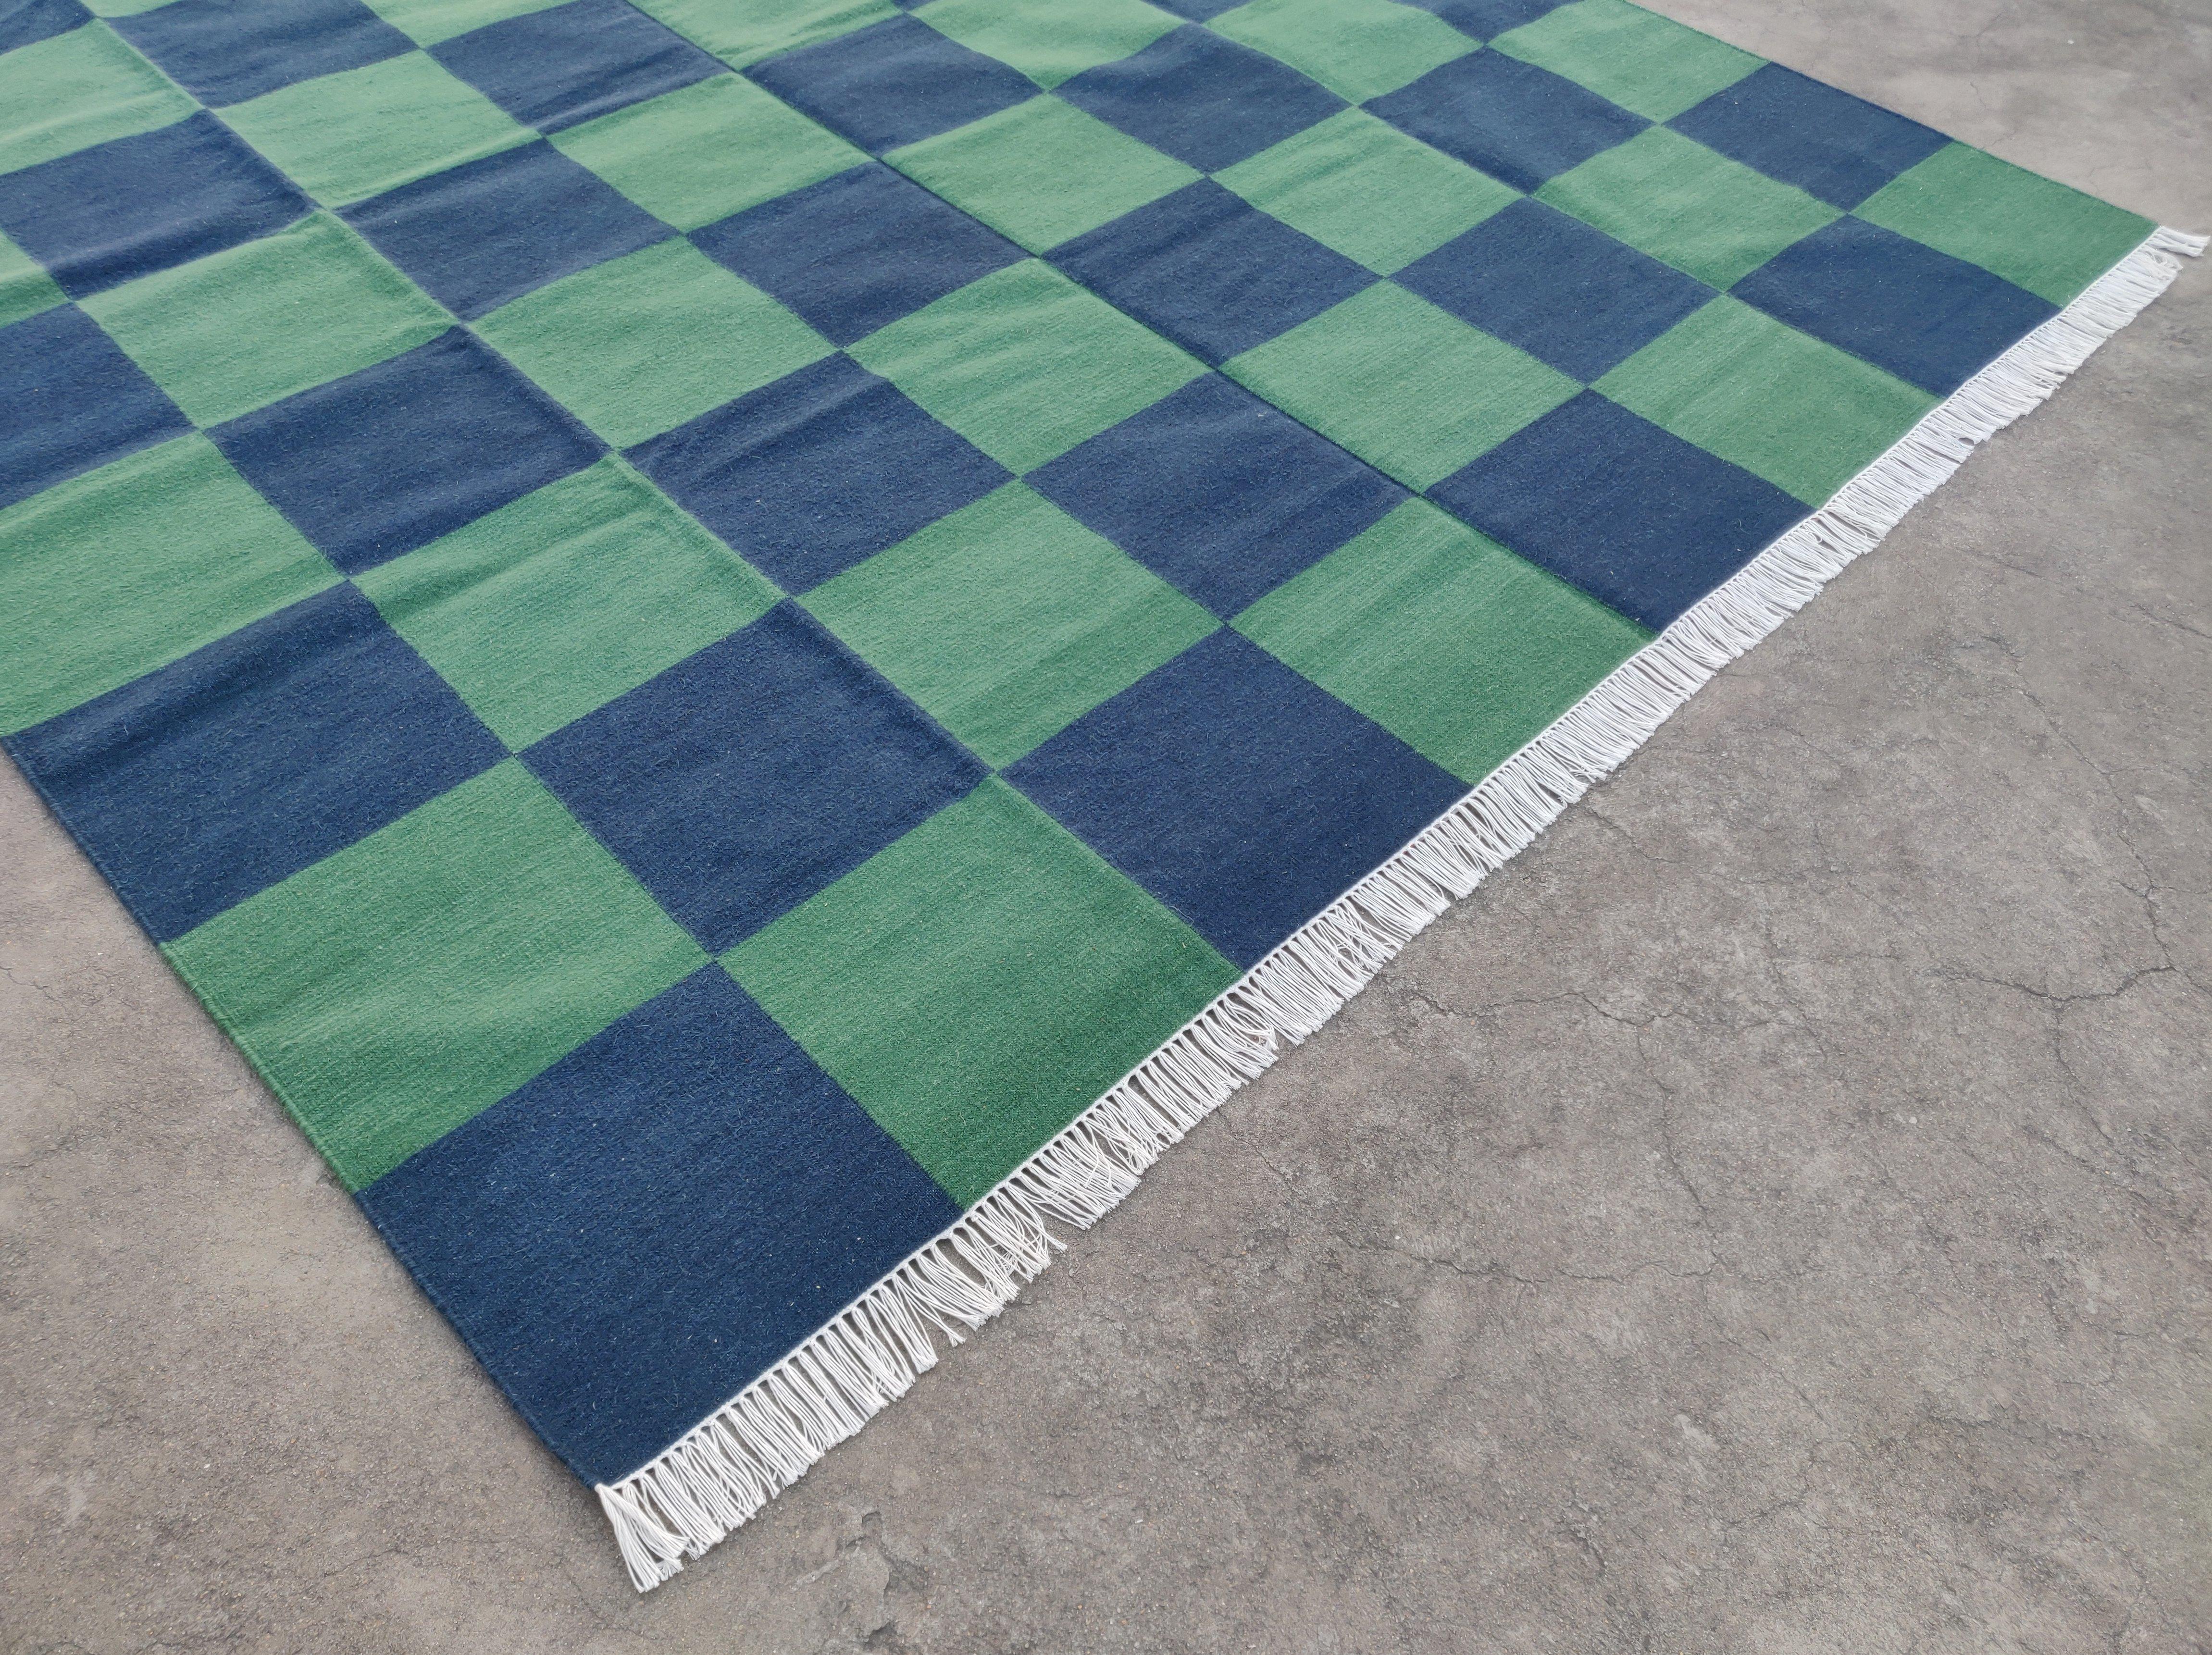 Contemporary Handmade Woolen Area Flat Weave Rug, 6x9 Blue And Green Tile Checked Dhurrie Rug For Sale